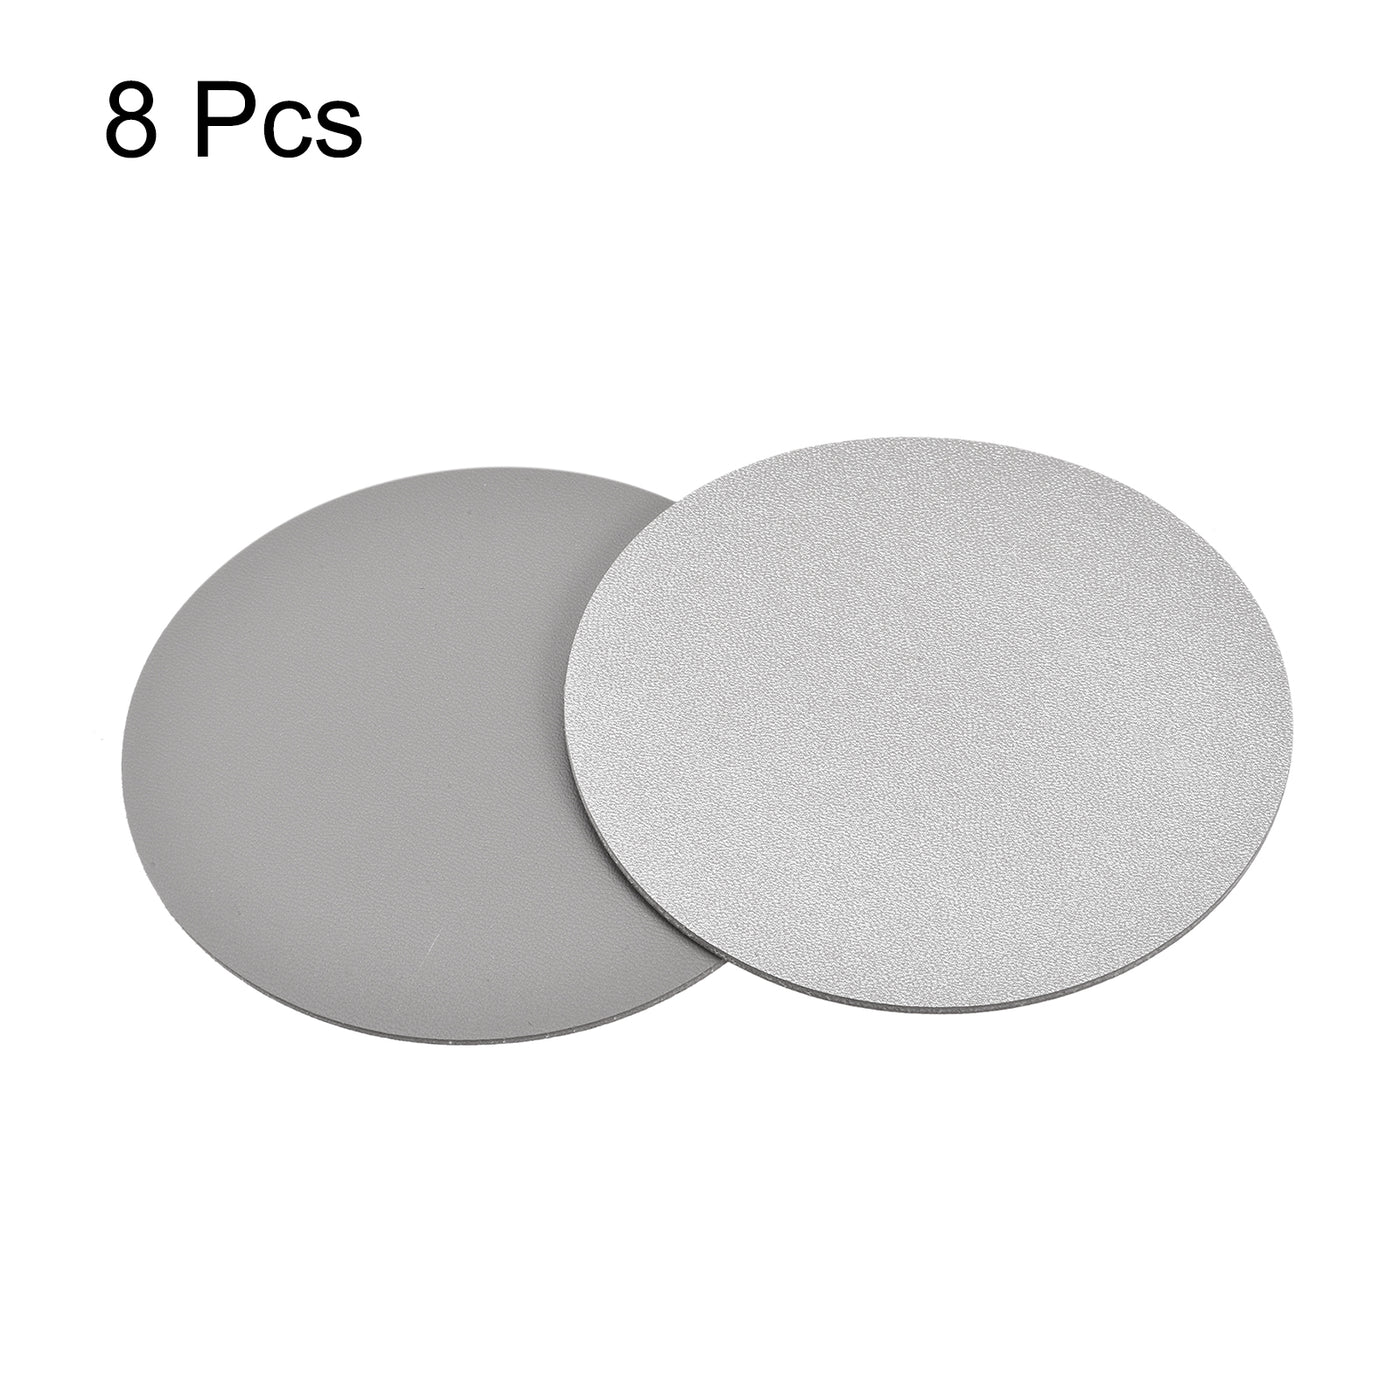 uxcell Uxcell 102mm(4.02") Round Coasters PU Cup Mat Pad for Tableware Silver Tone 8pcs